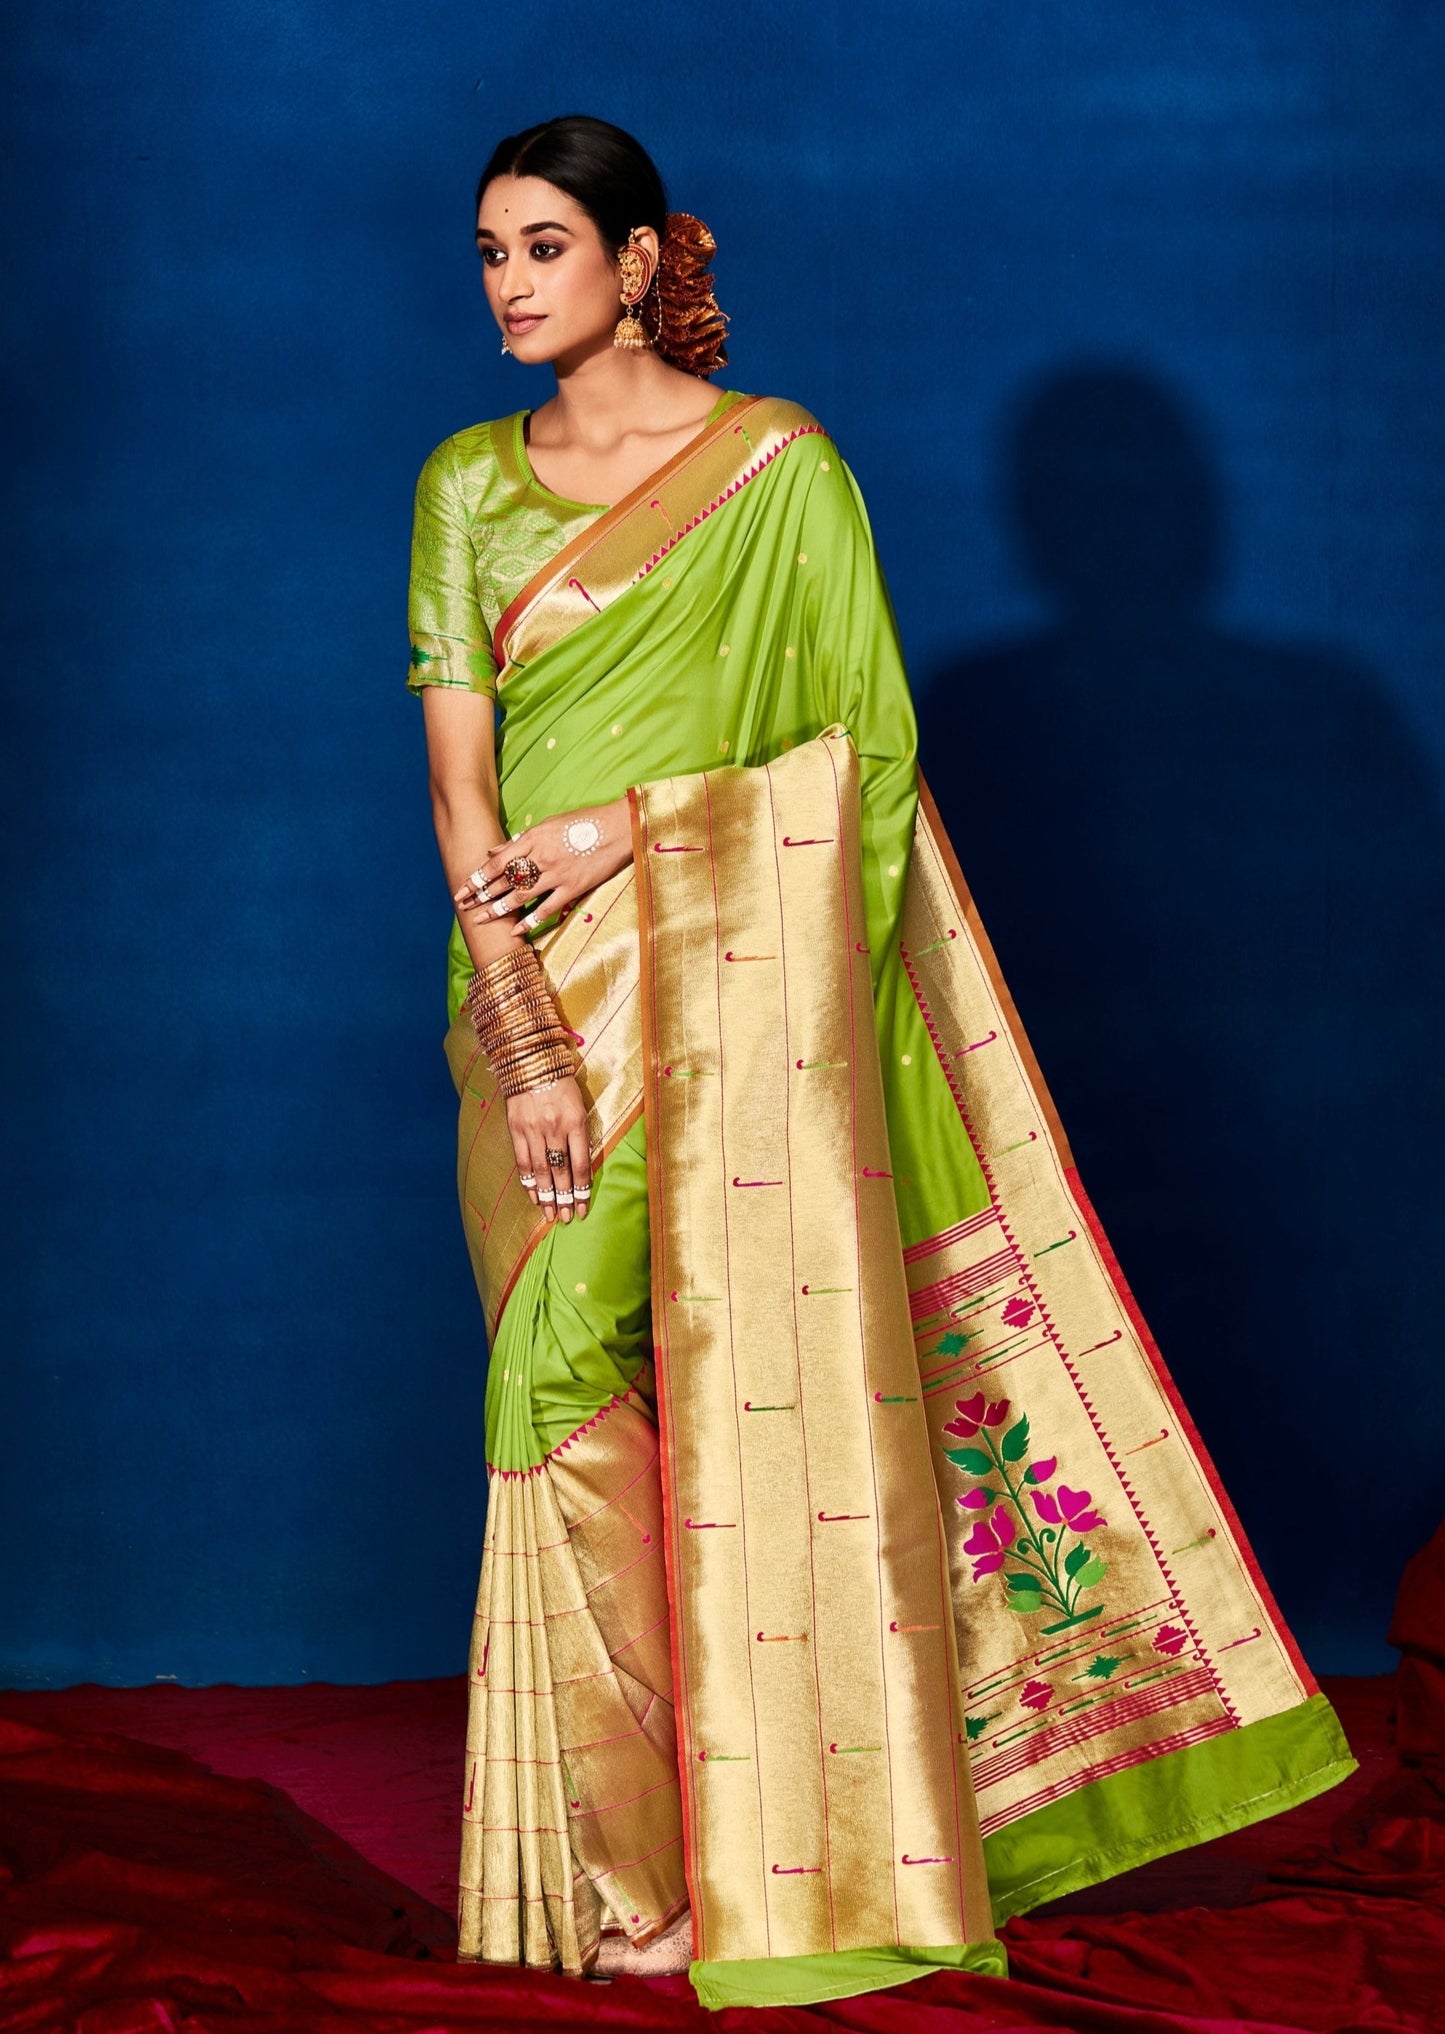 Woman in green silk saree standing on red carpet